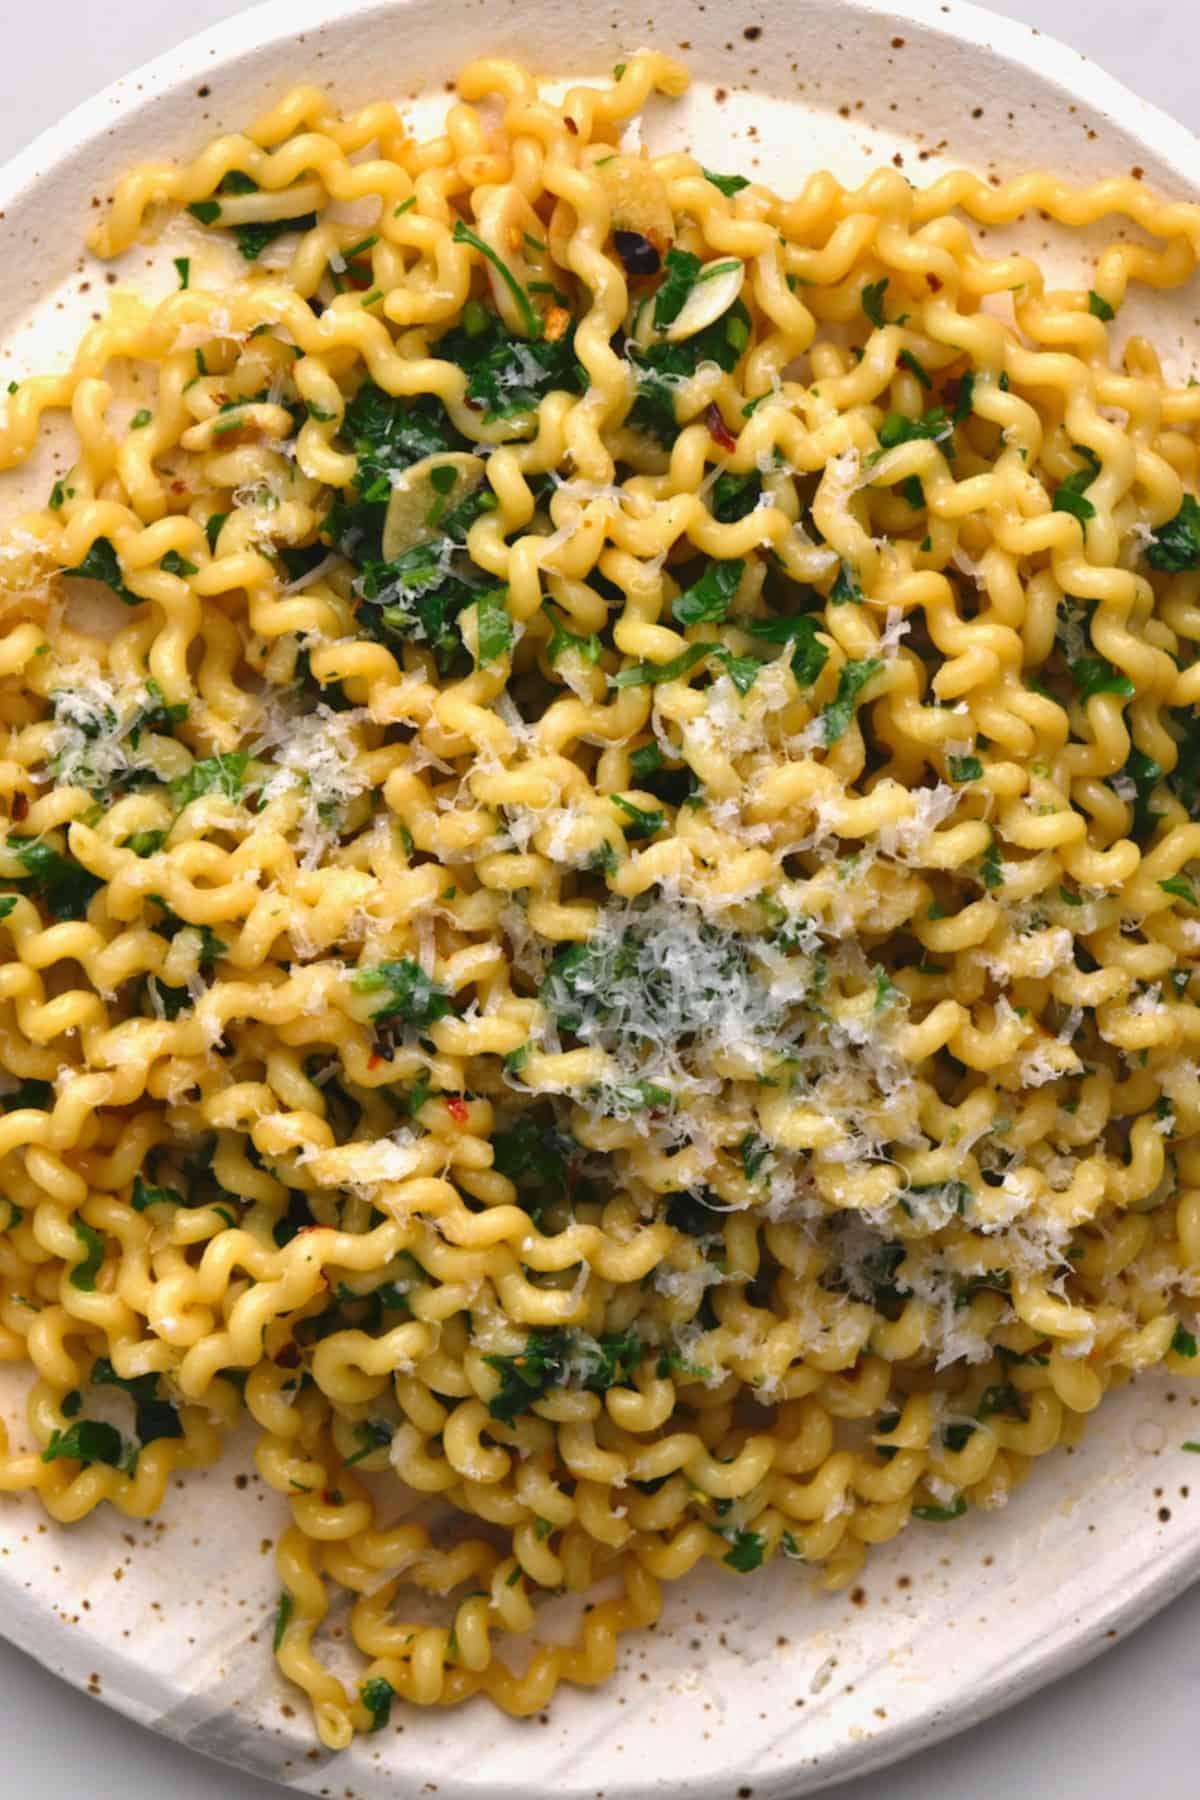 Garlic olive oil pasta on a plate